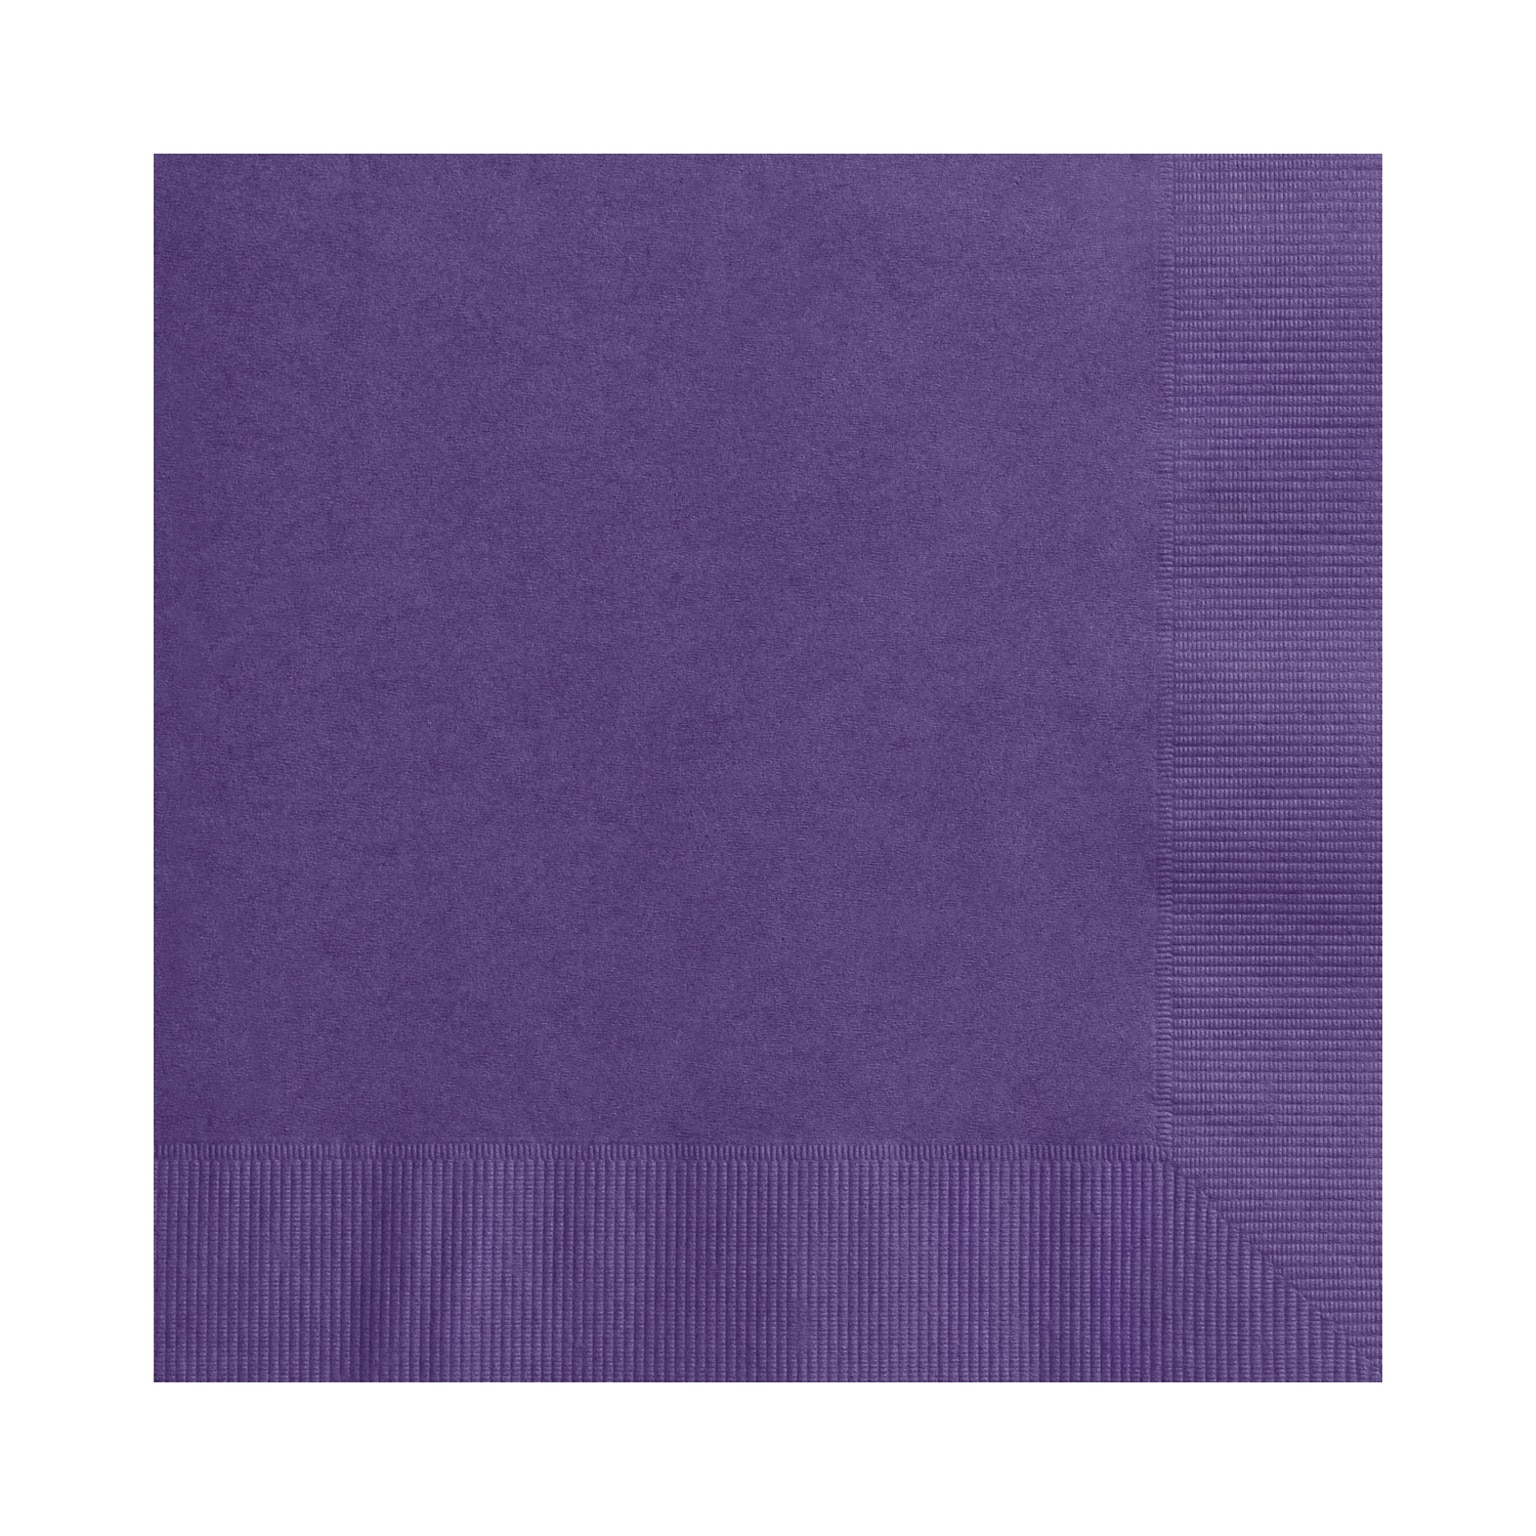 Custom 6-1/2 Square Violet Luncheon Napkin, 3-Ply Tissue, 100/Pack